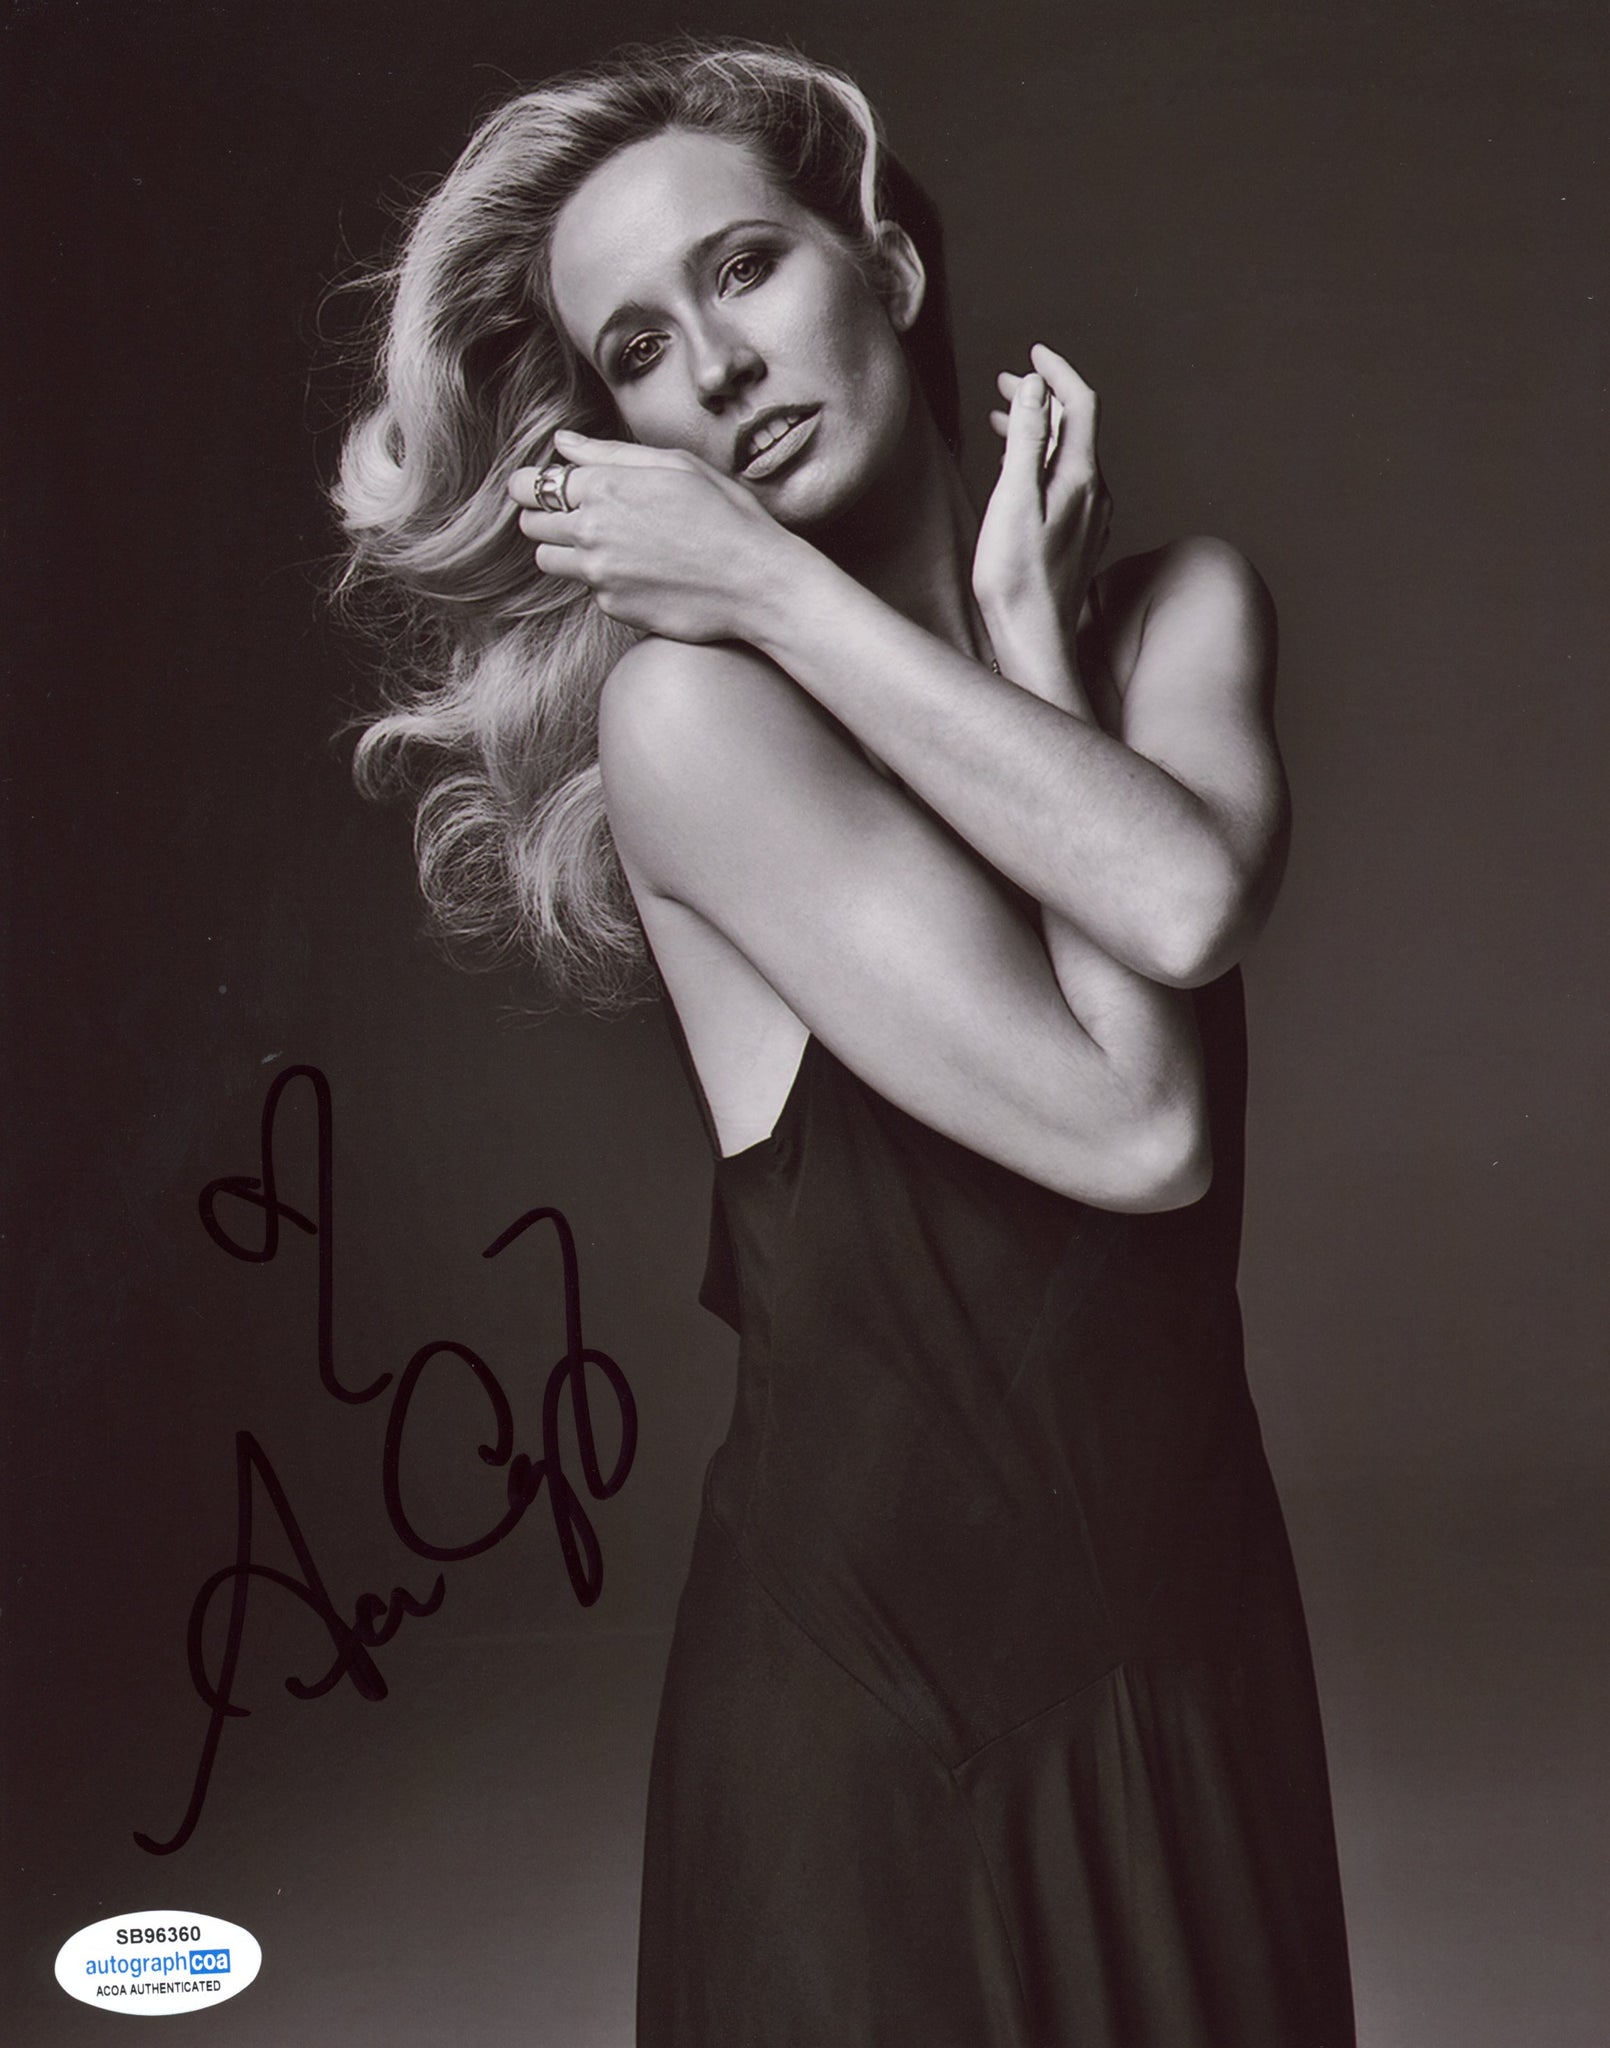 Anna Camp Pitch Perfect Signed Autograph 8x10 Photo ACOA